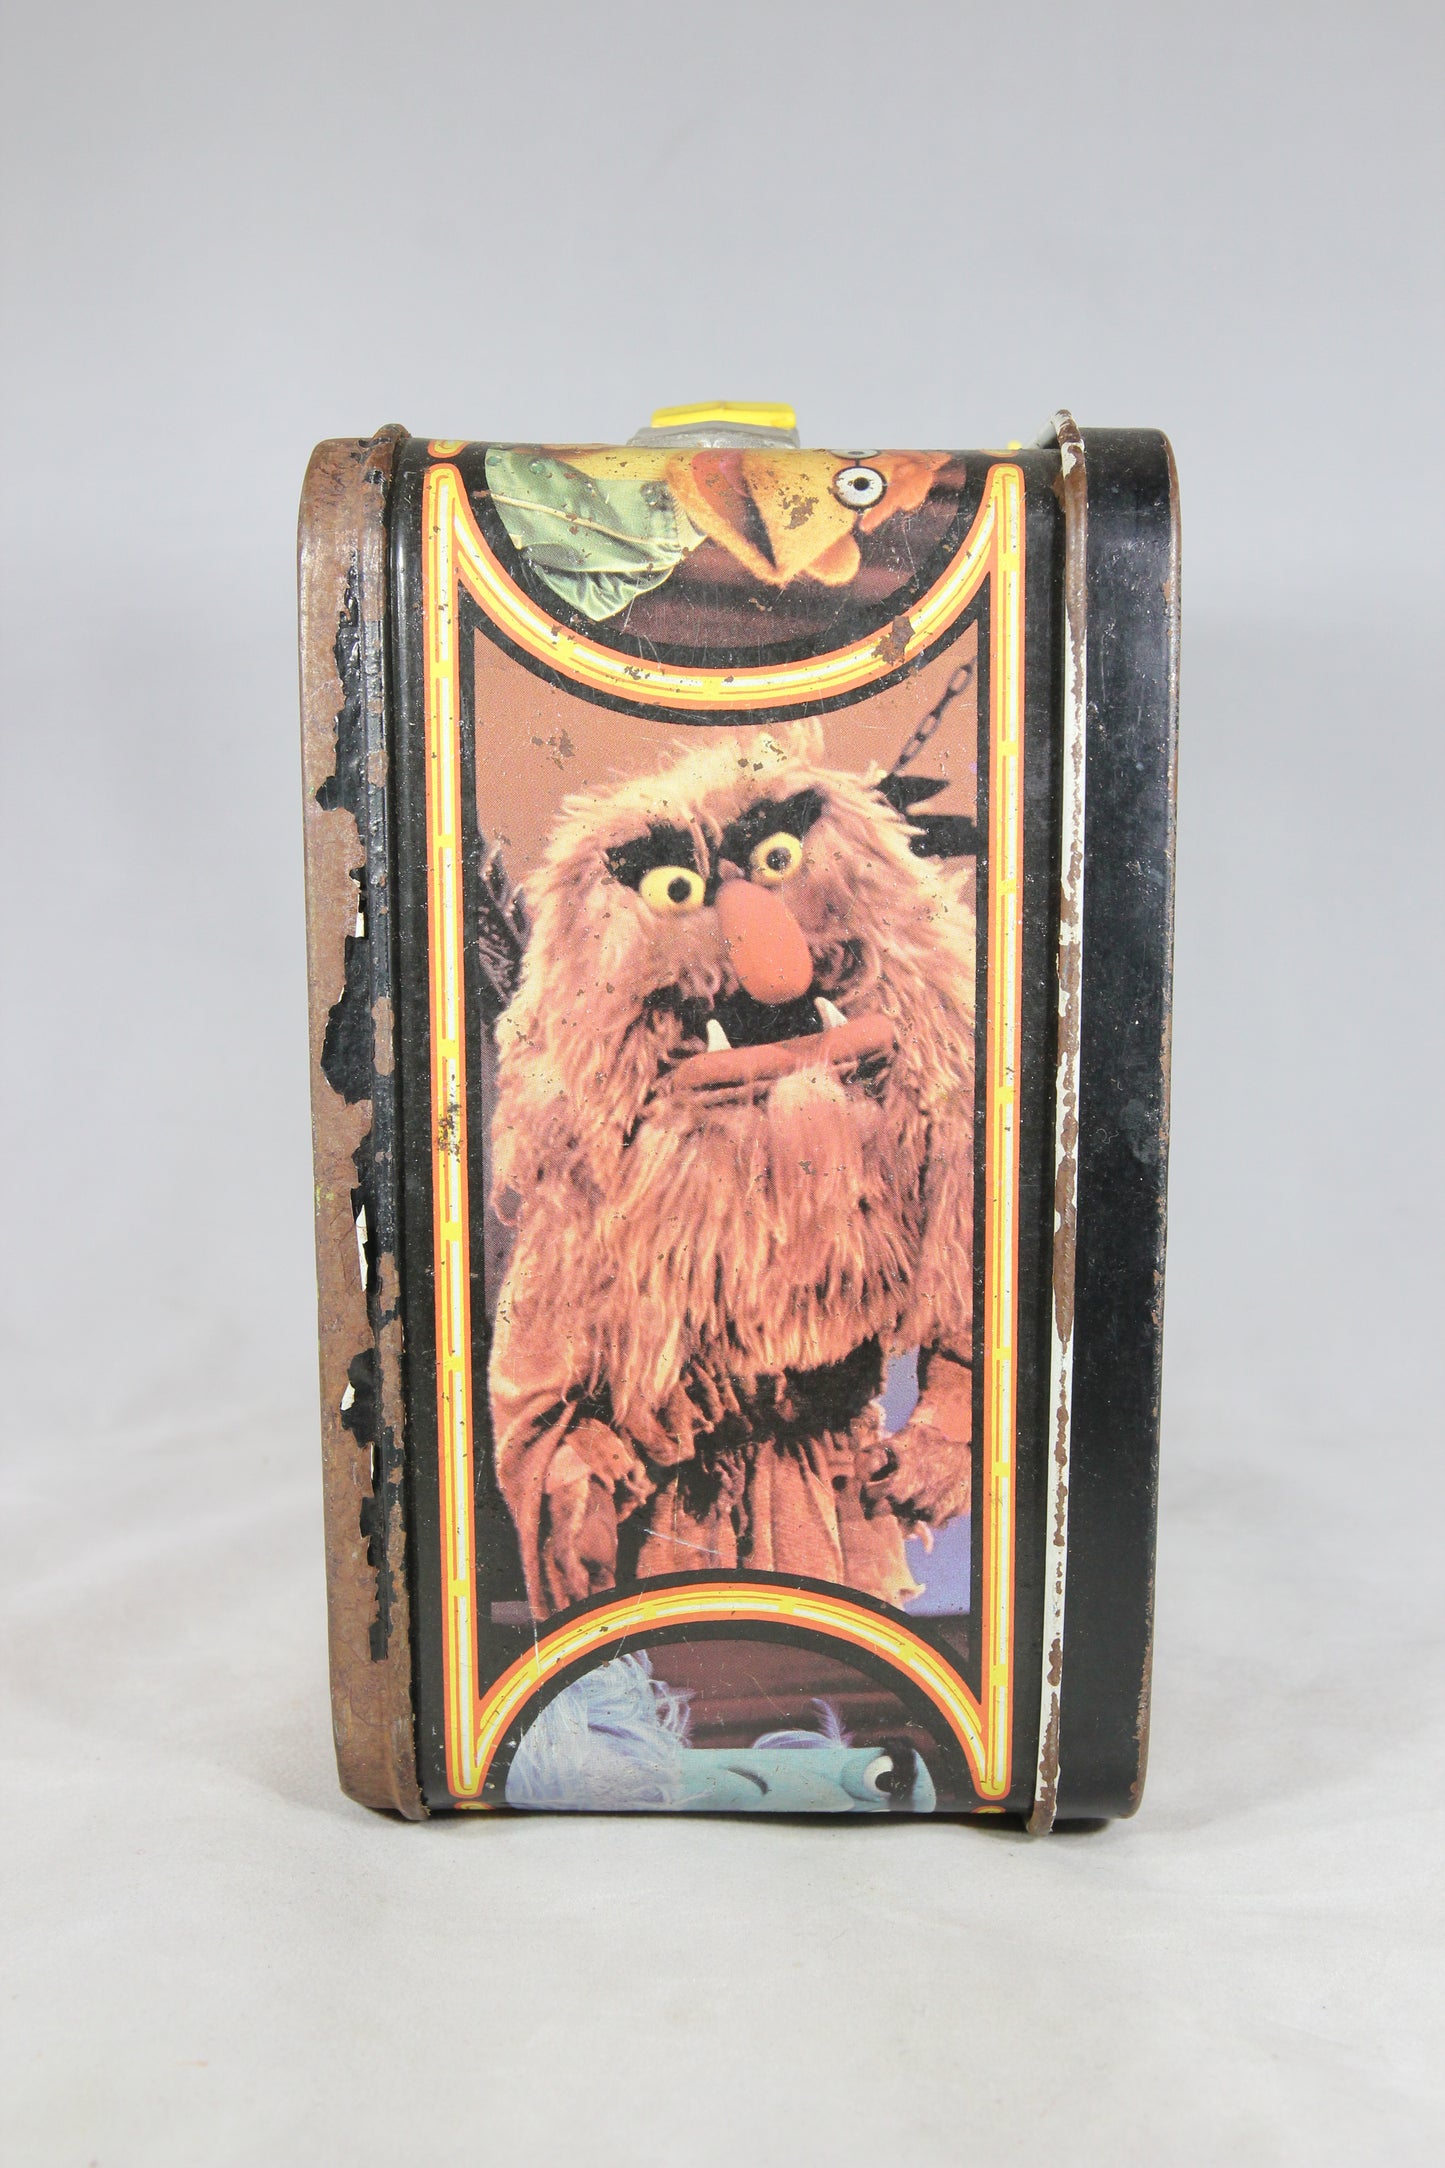 Muppets Fozzie Bear Thermos Brand Metal Lunchbox, 1979